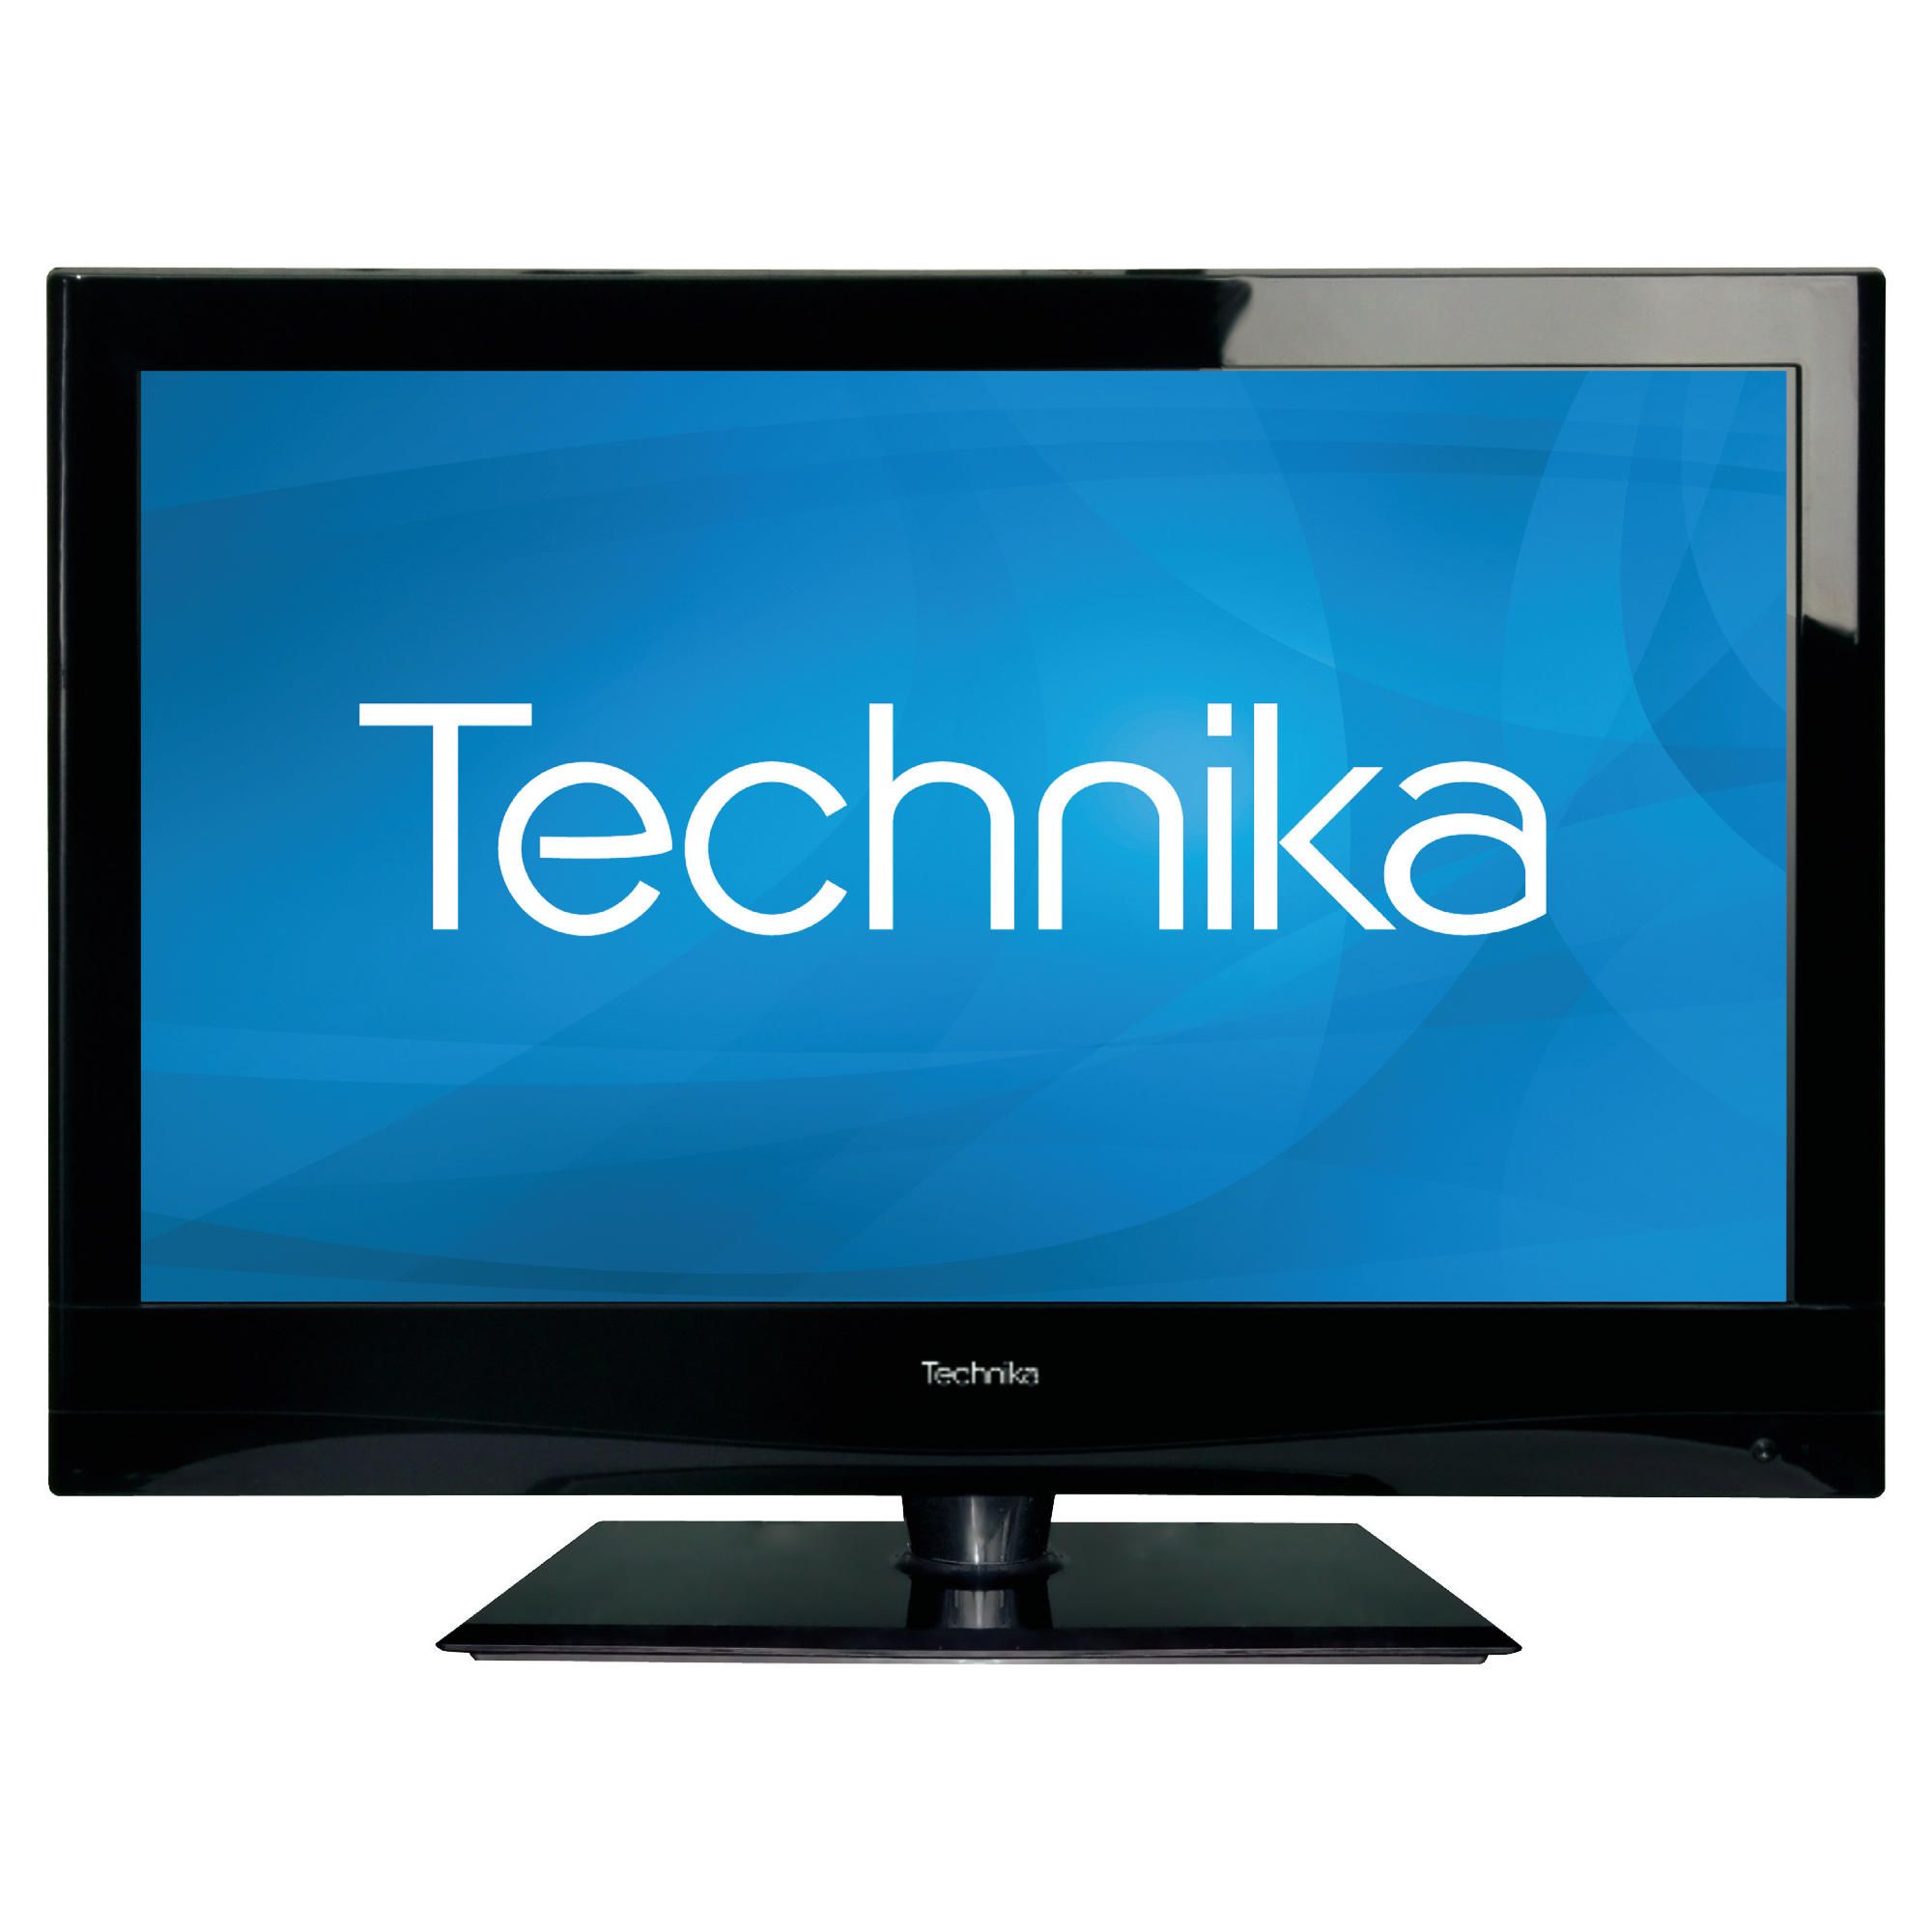 Technika 46-270 46'' Widescreen Full HD 1080p LCD TV with Freeview